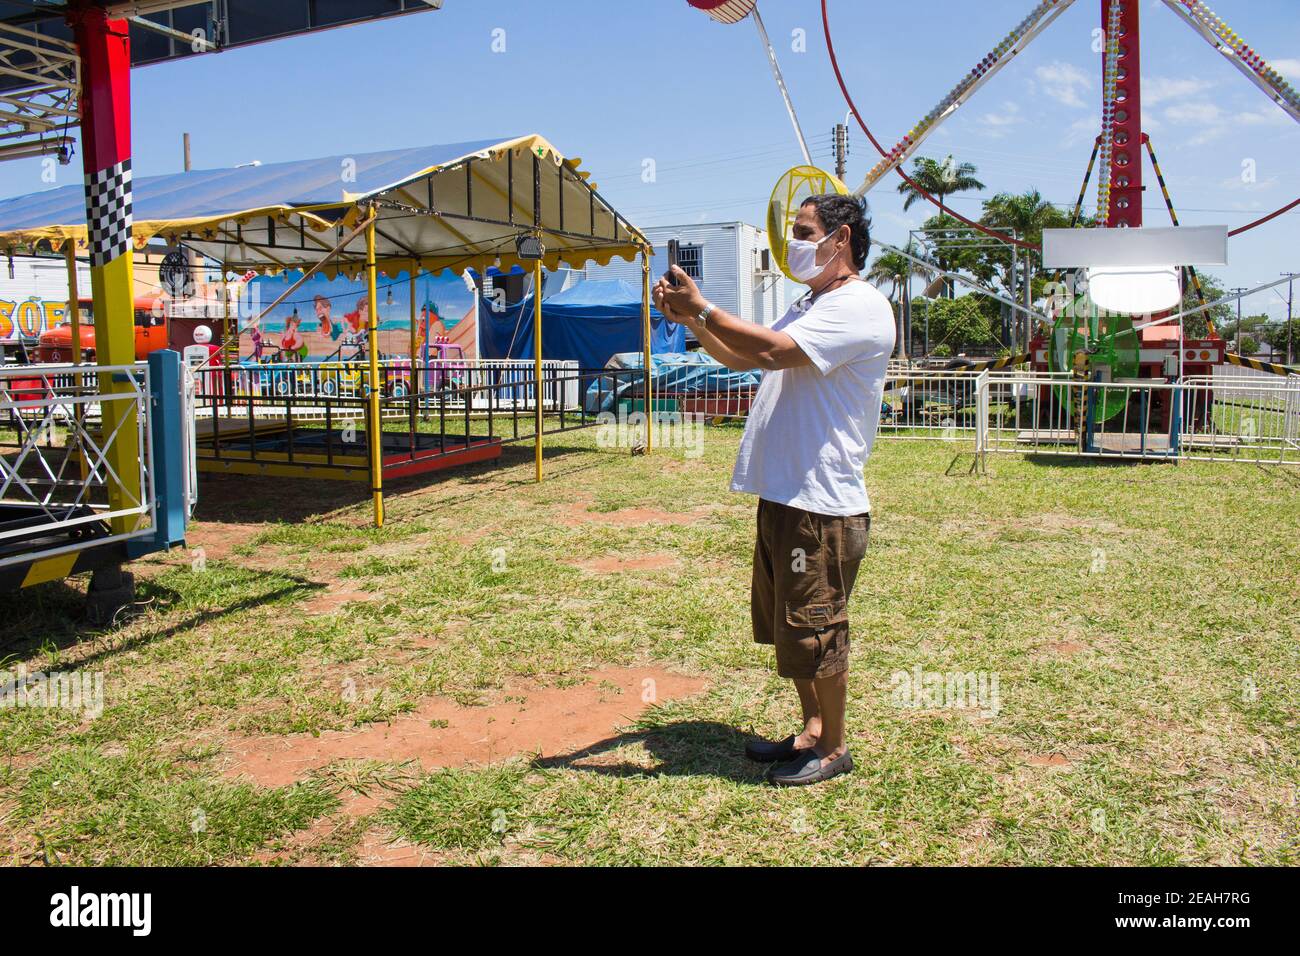 Ibitinga, SP, Brazil - Feb 07 2021: Man with mask taking a selfie picture at an amusement park; Brazilian countryside Stock Photo